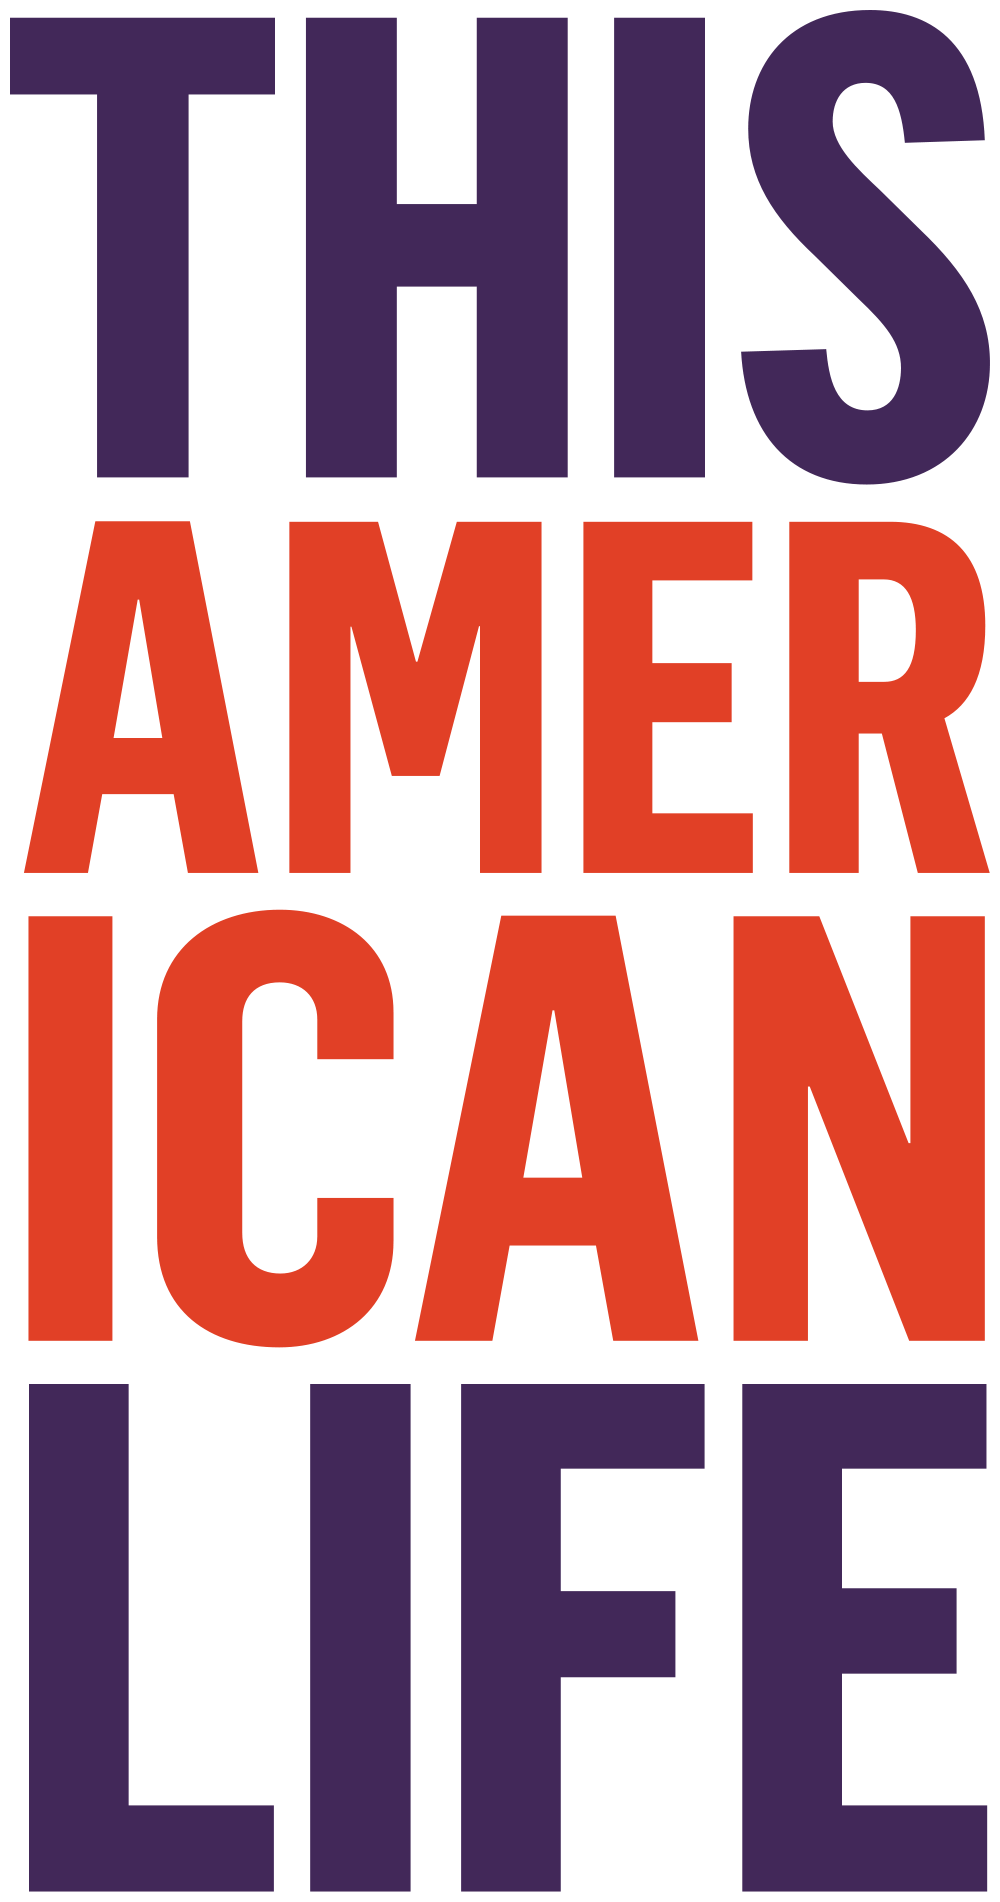 This Logo - File:This American Life logo.svg - Wikimedia Commons